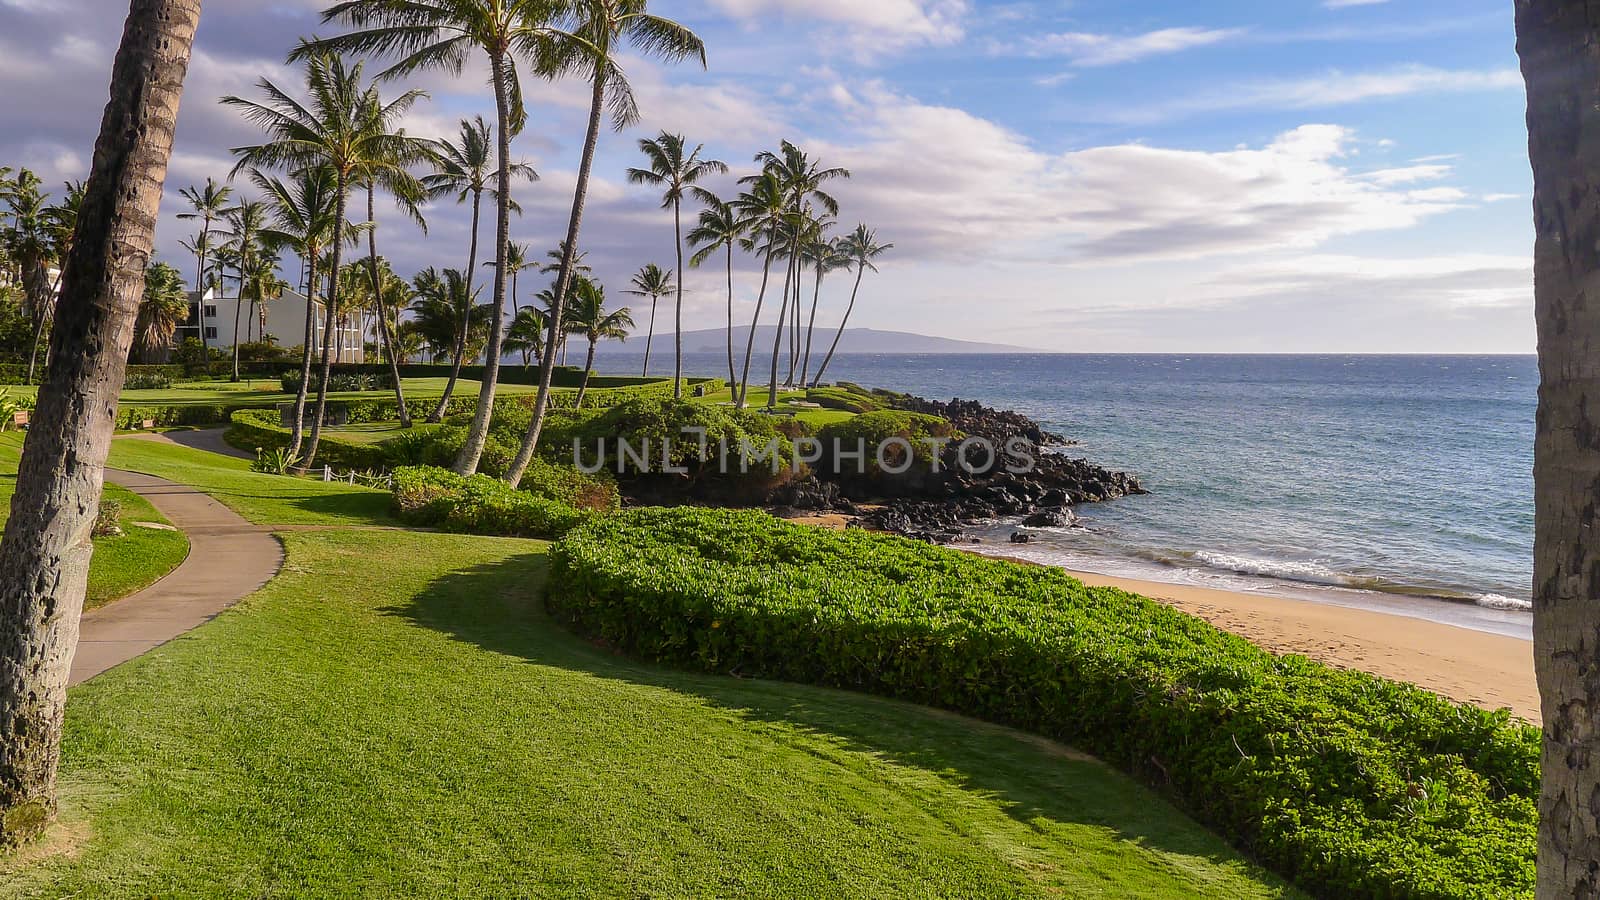 Coastal Pathway in Maui by chrisukphoto